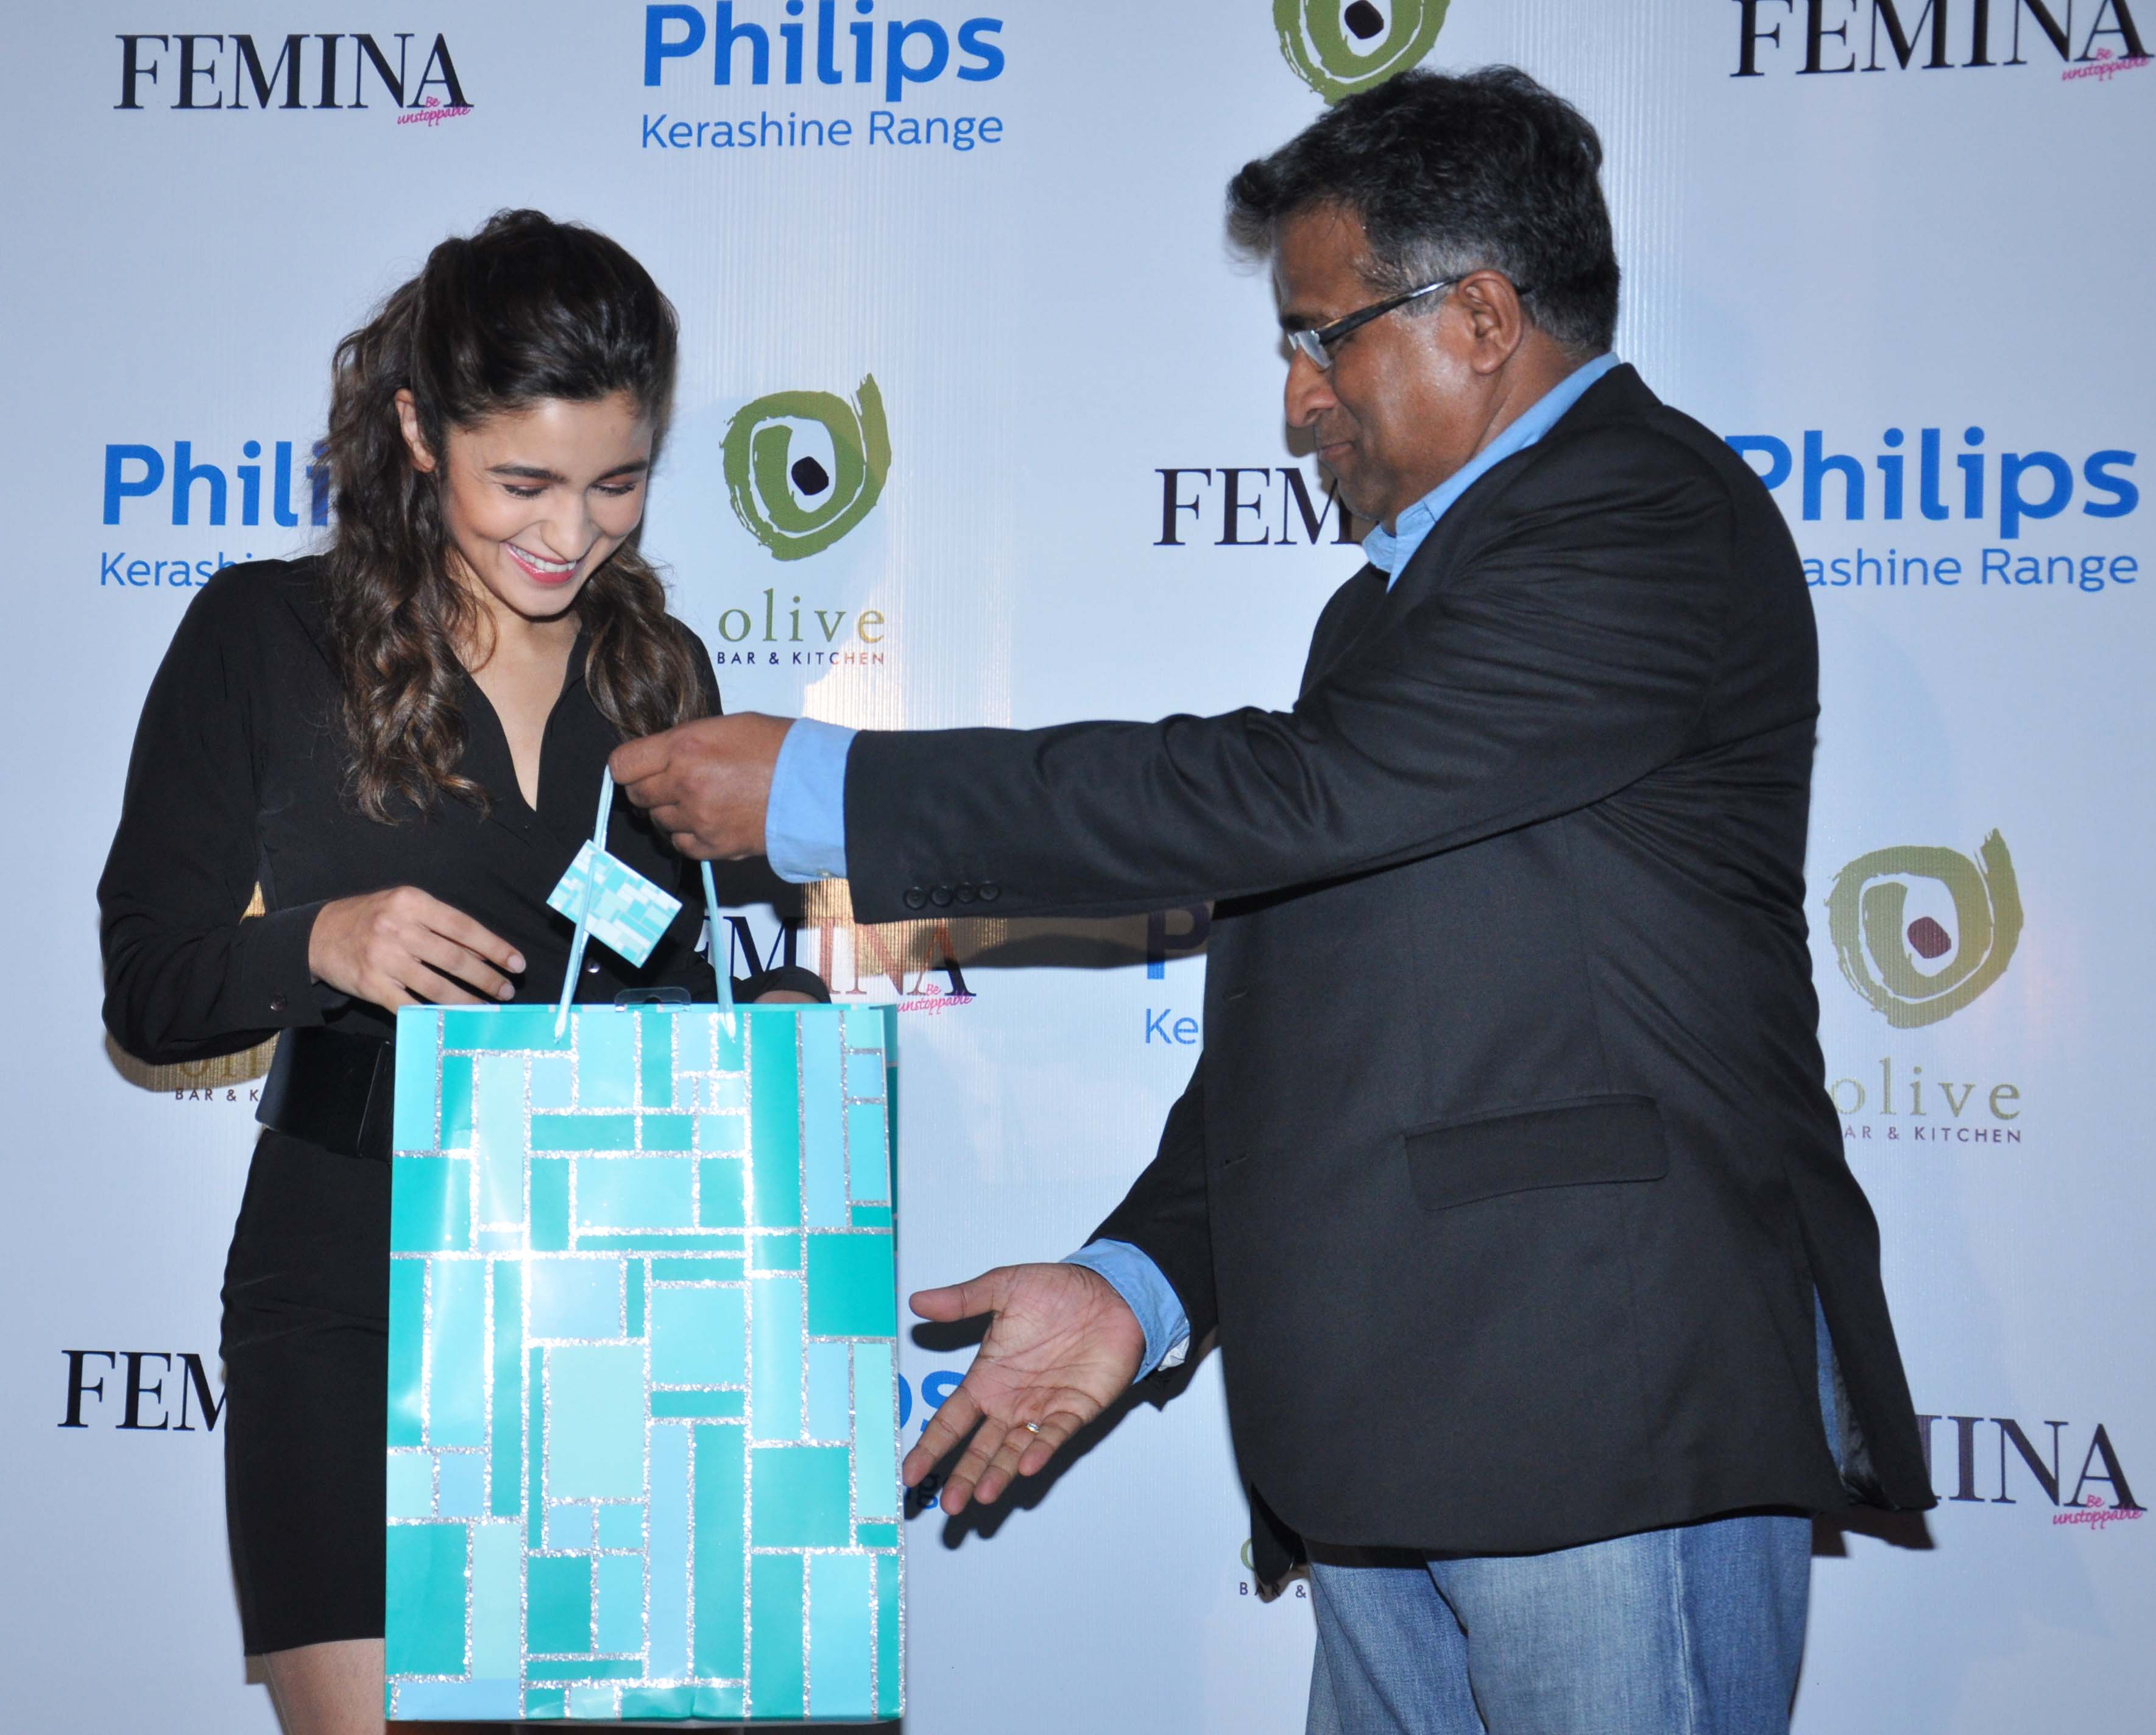 Alia Bhatt graced the cover launch of Feminaas 55th Anniversary issue at Guppy by Olive.19